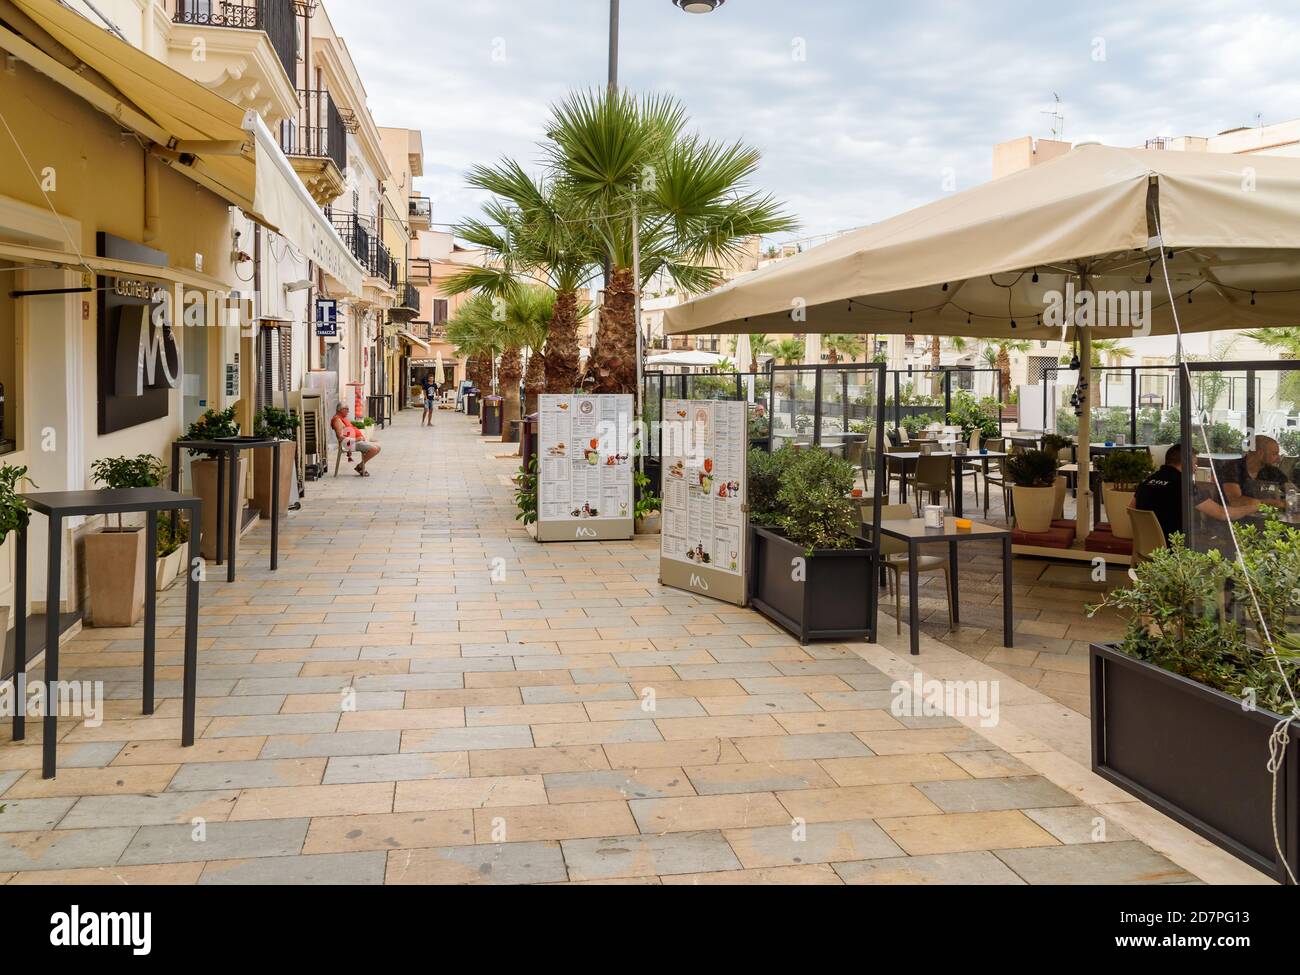 Terrasini, Sicily, Italy - September 24, 2020: View of Duomo Square with outdoor bars and restaurants in the center of Terrasini, province of Palermo, Stock Photo